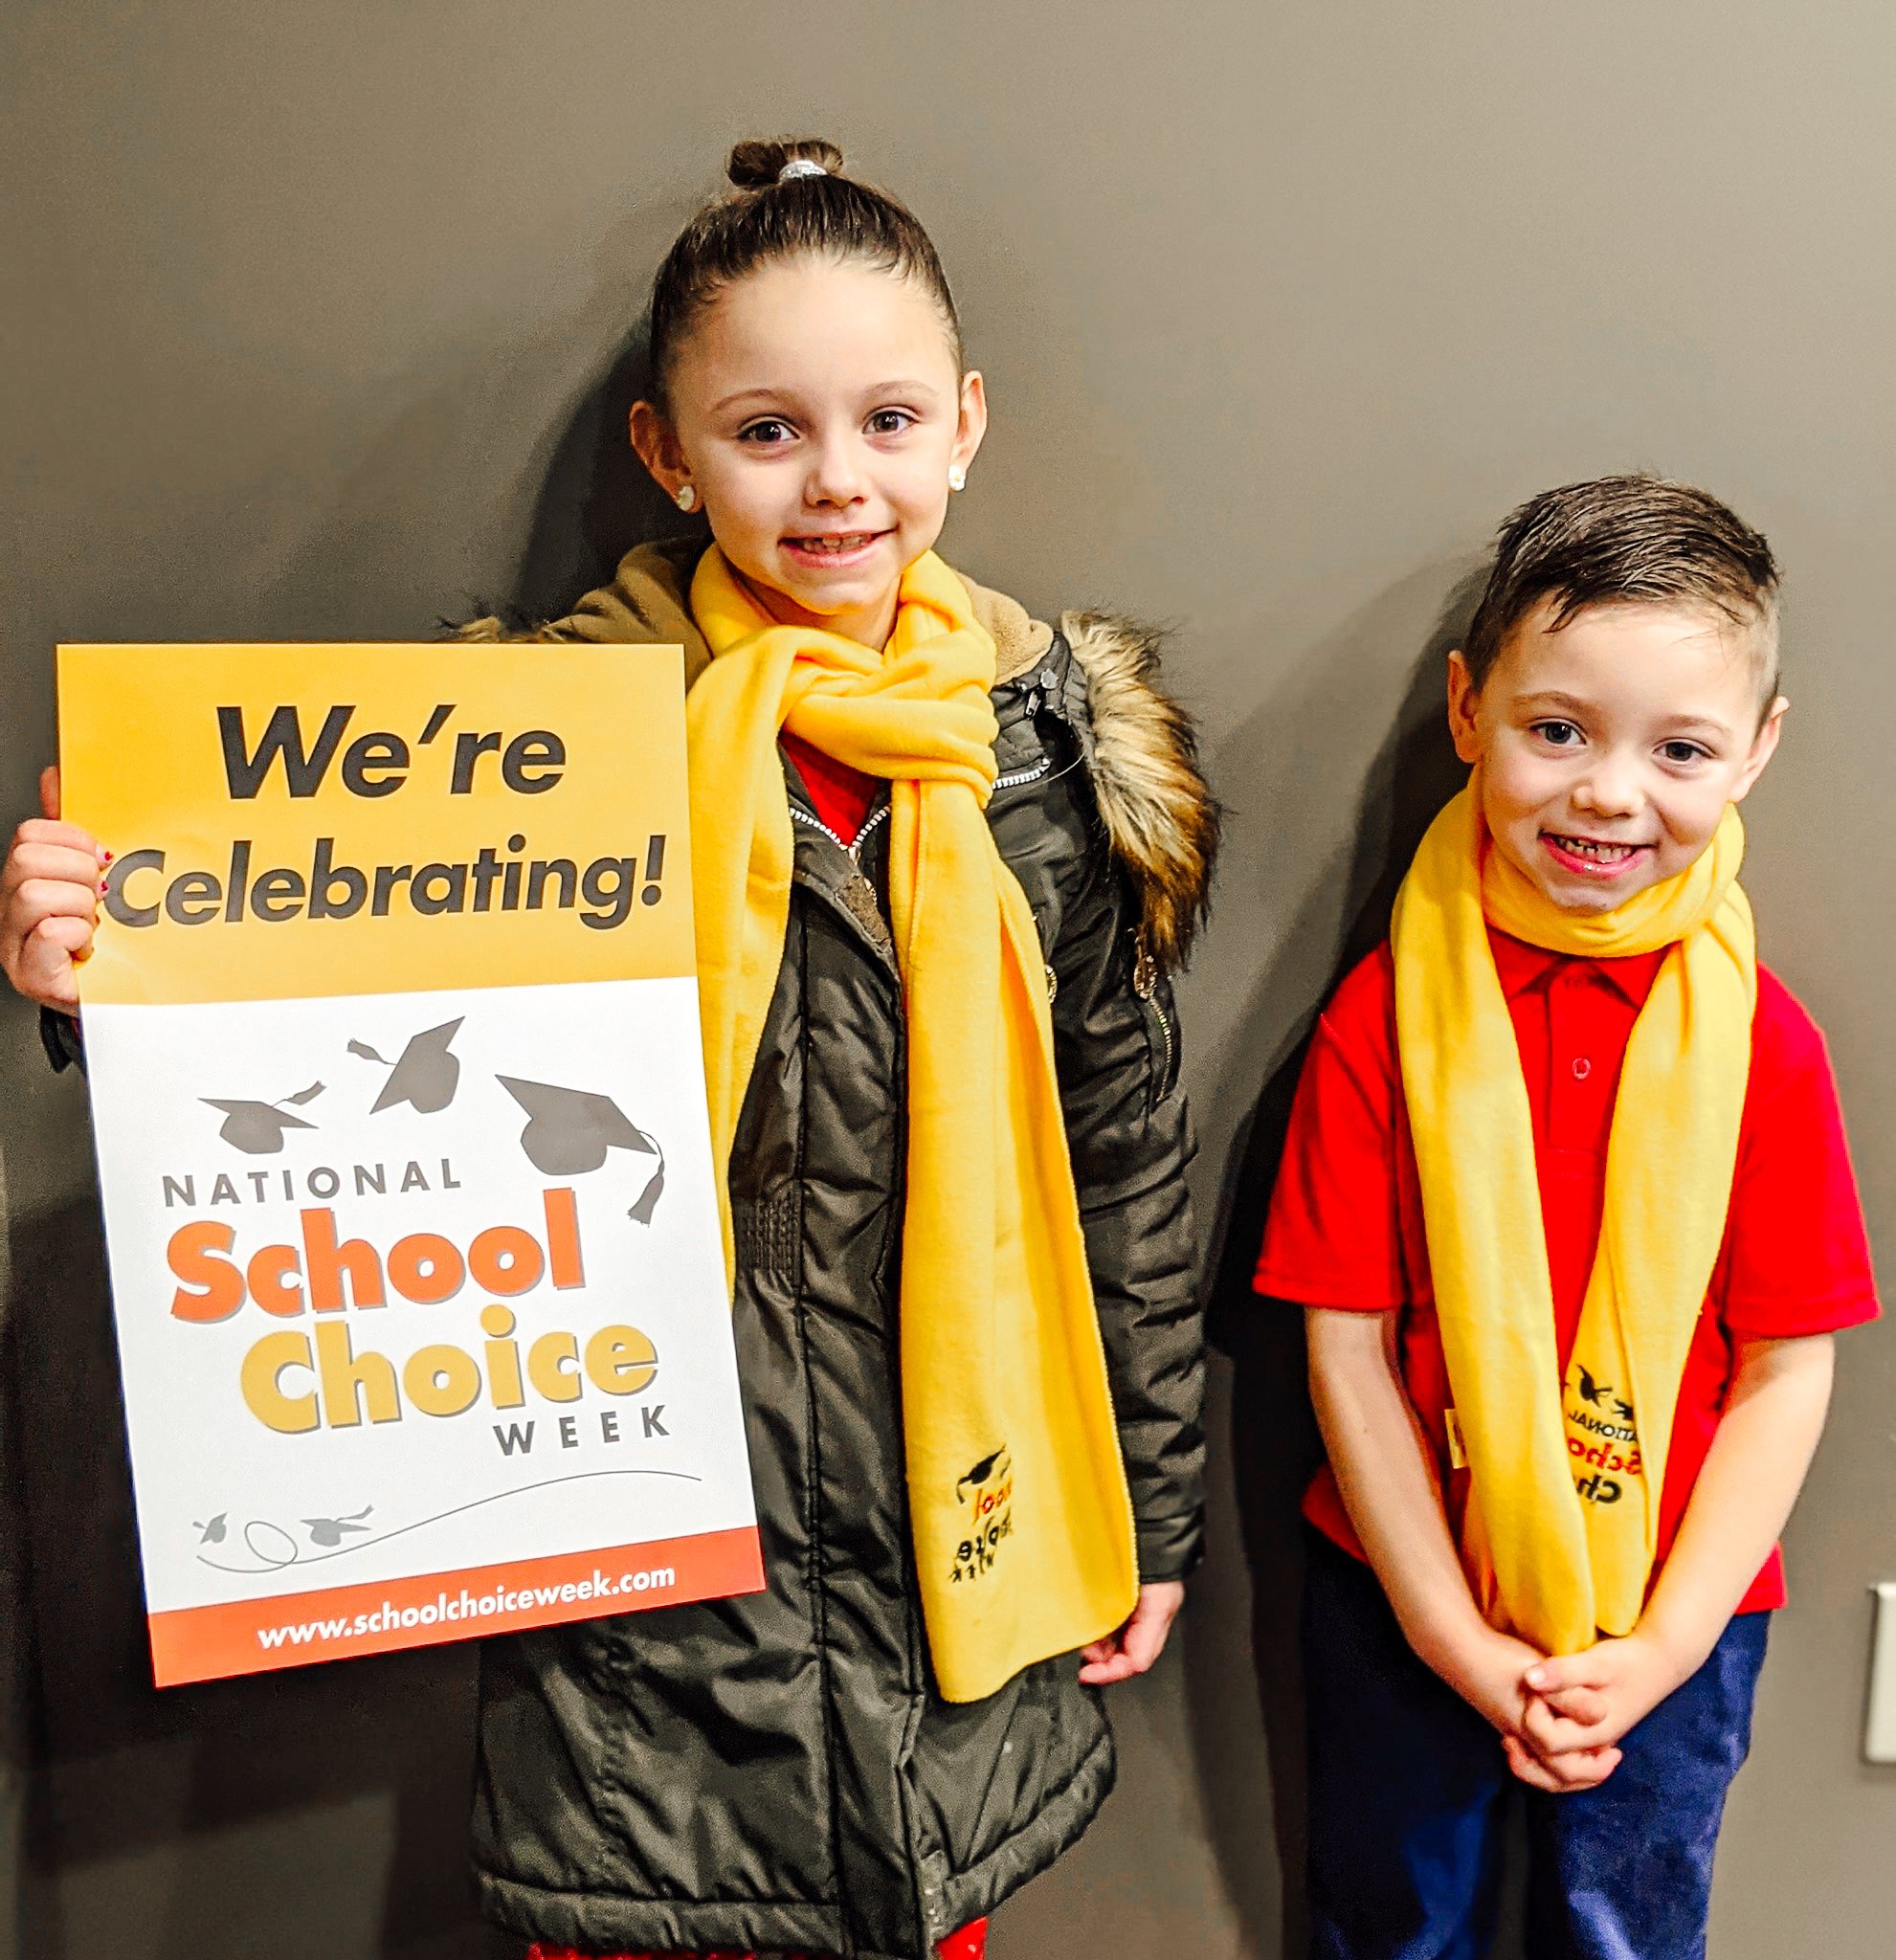 Two white students, a taller female and a male on the right smile wearing yellow National School Choice Week scarfs. The female student holds a sign reading 